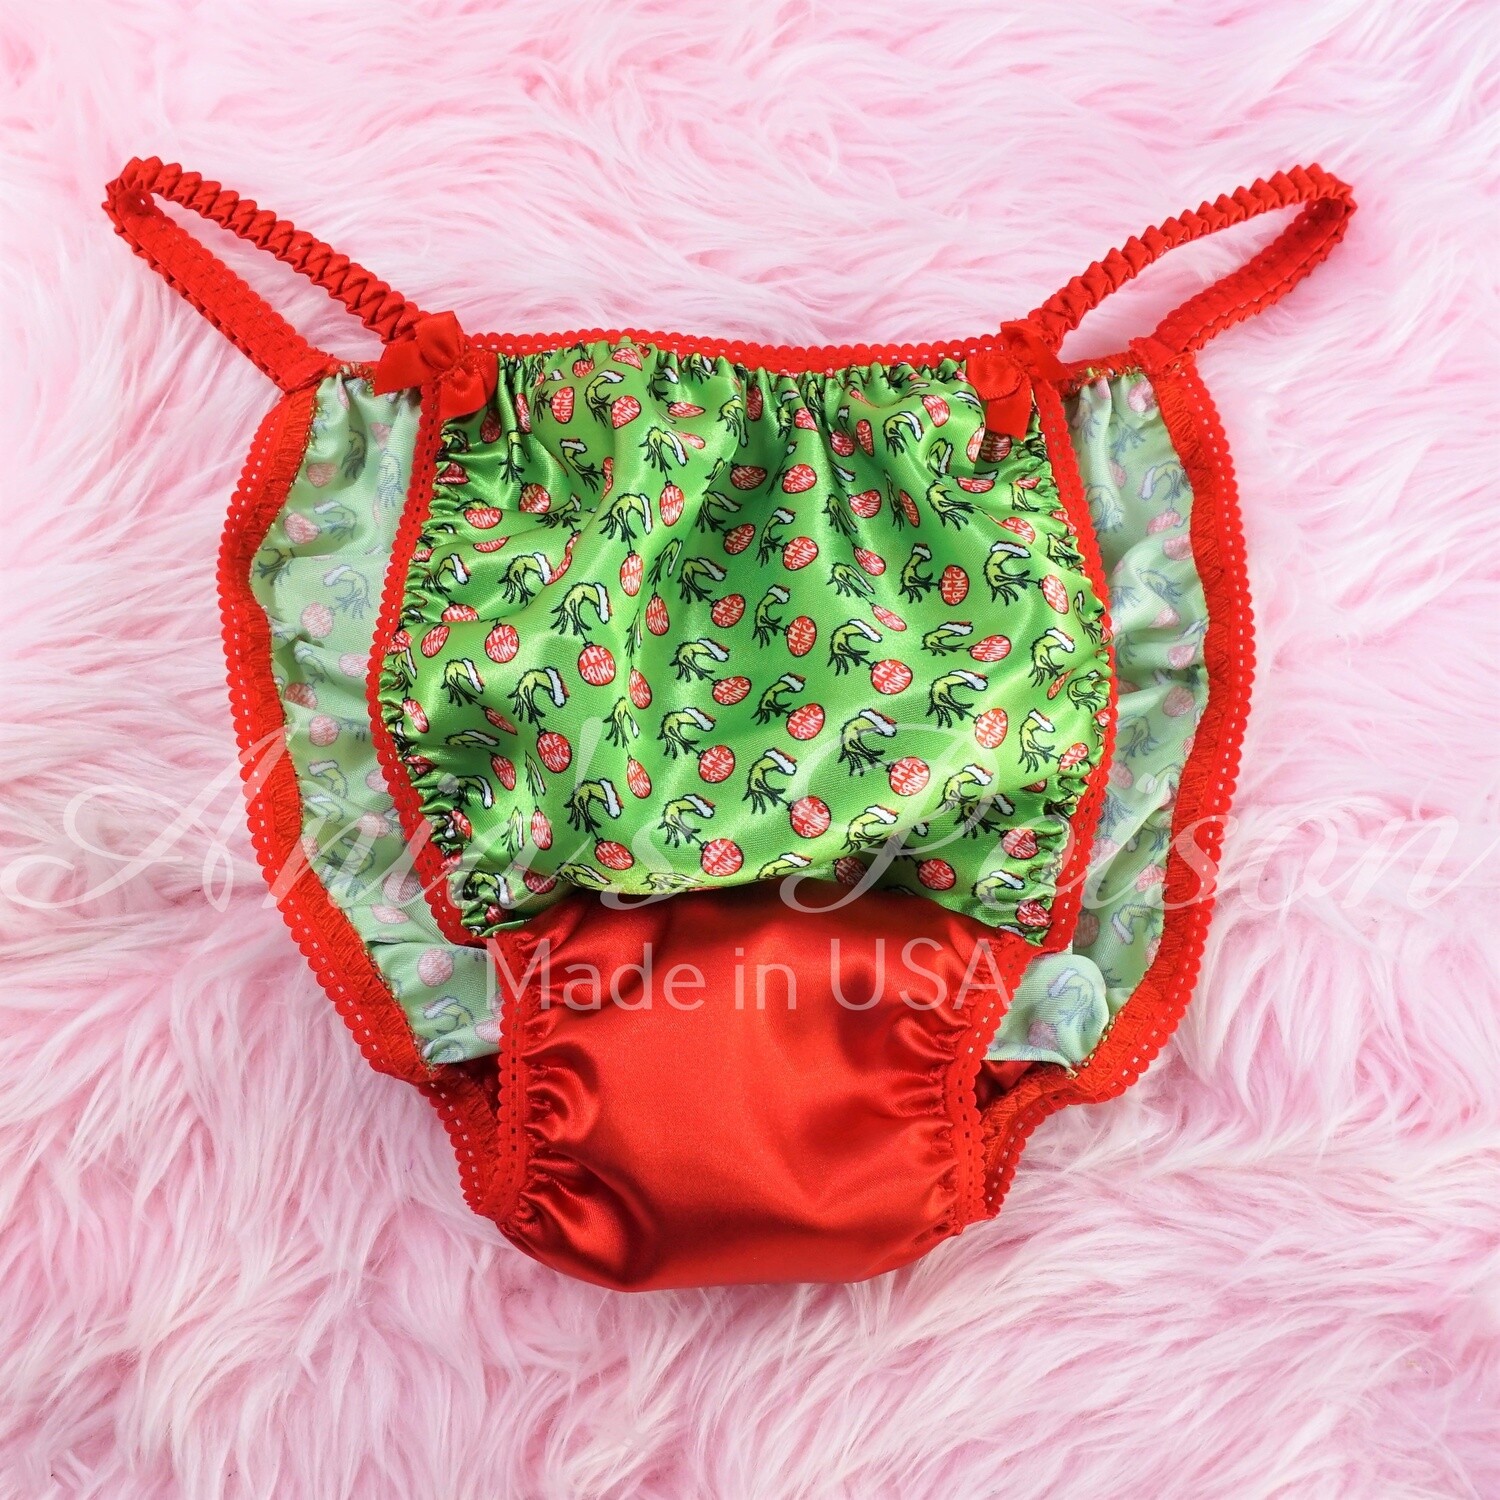 Christmas Ania's Poison sissy MENS SATIN Green Grouch Red Ornament wet look Mens holiday panties sz M-XL